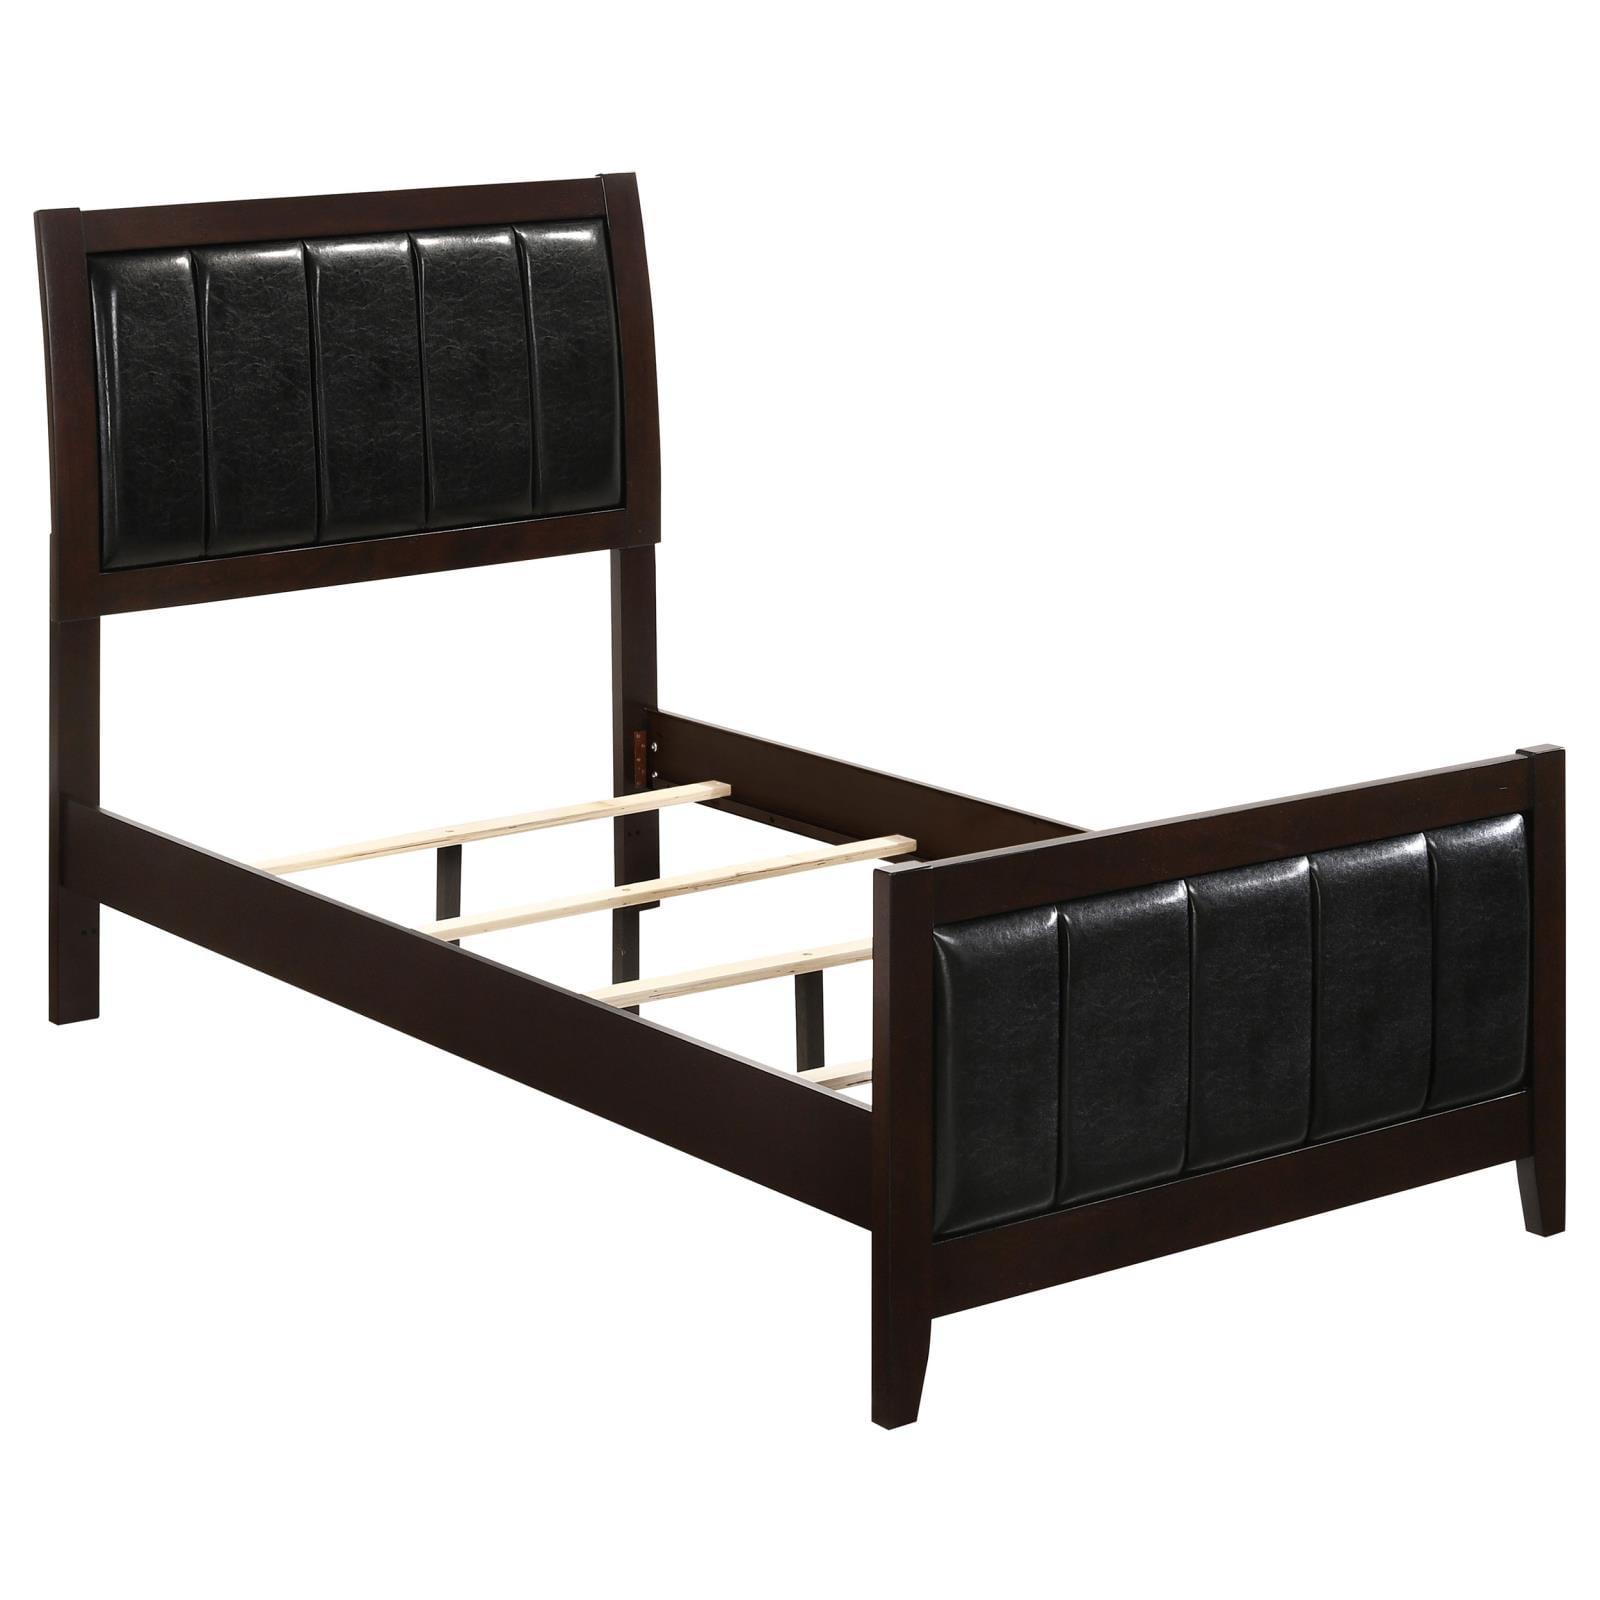 Transitional Twin Upholstered Bed with Tufted Faux Leather in Black and Brown